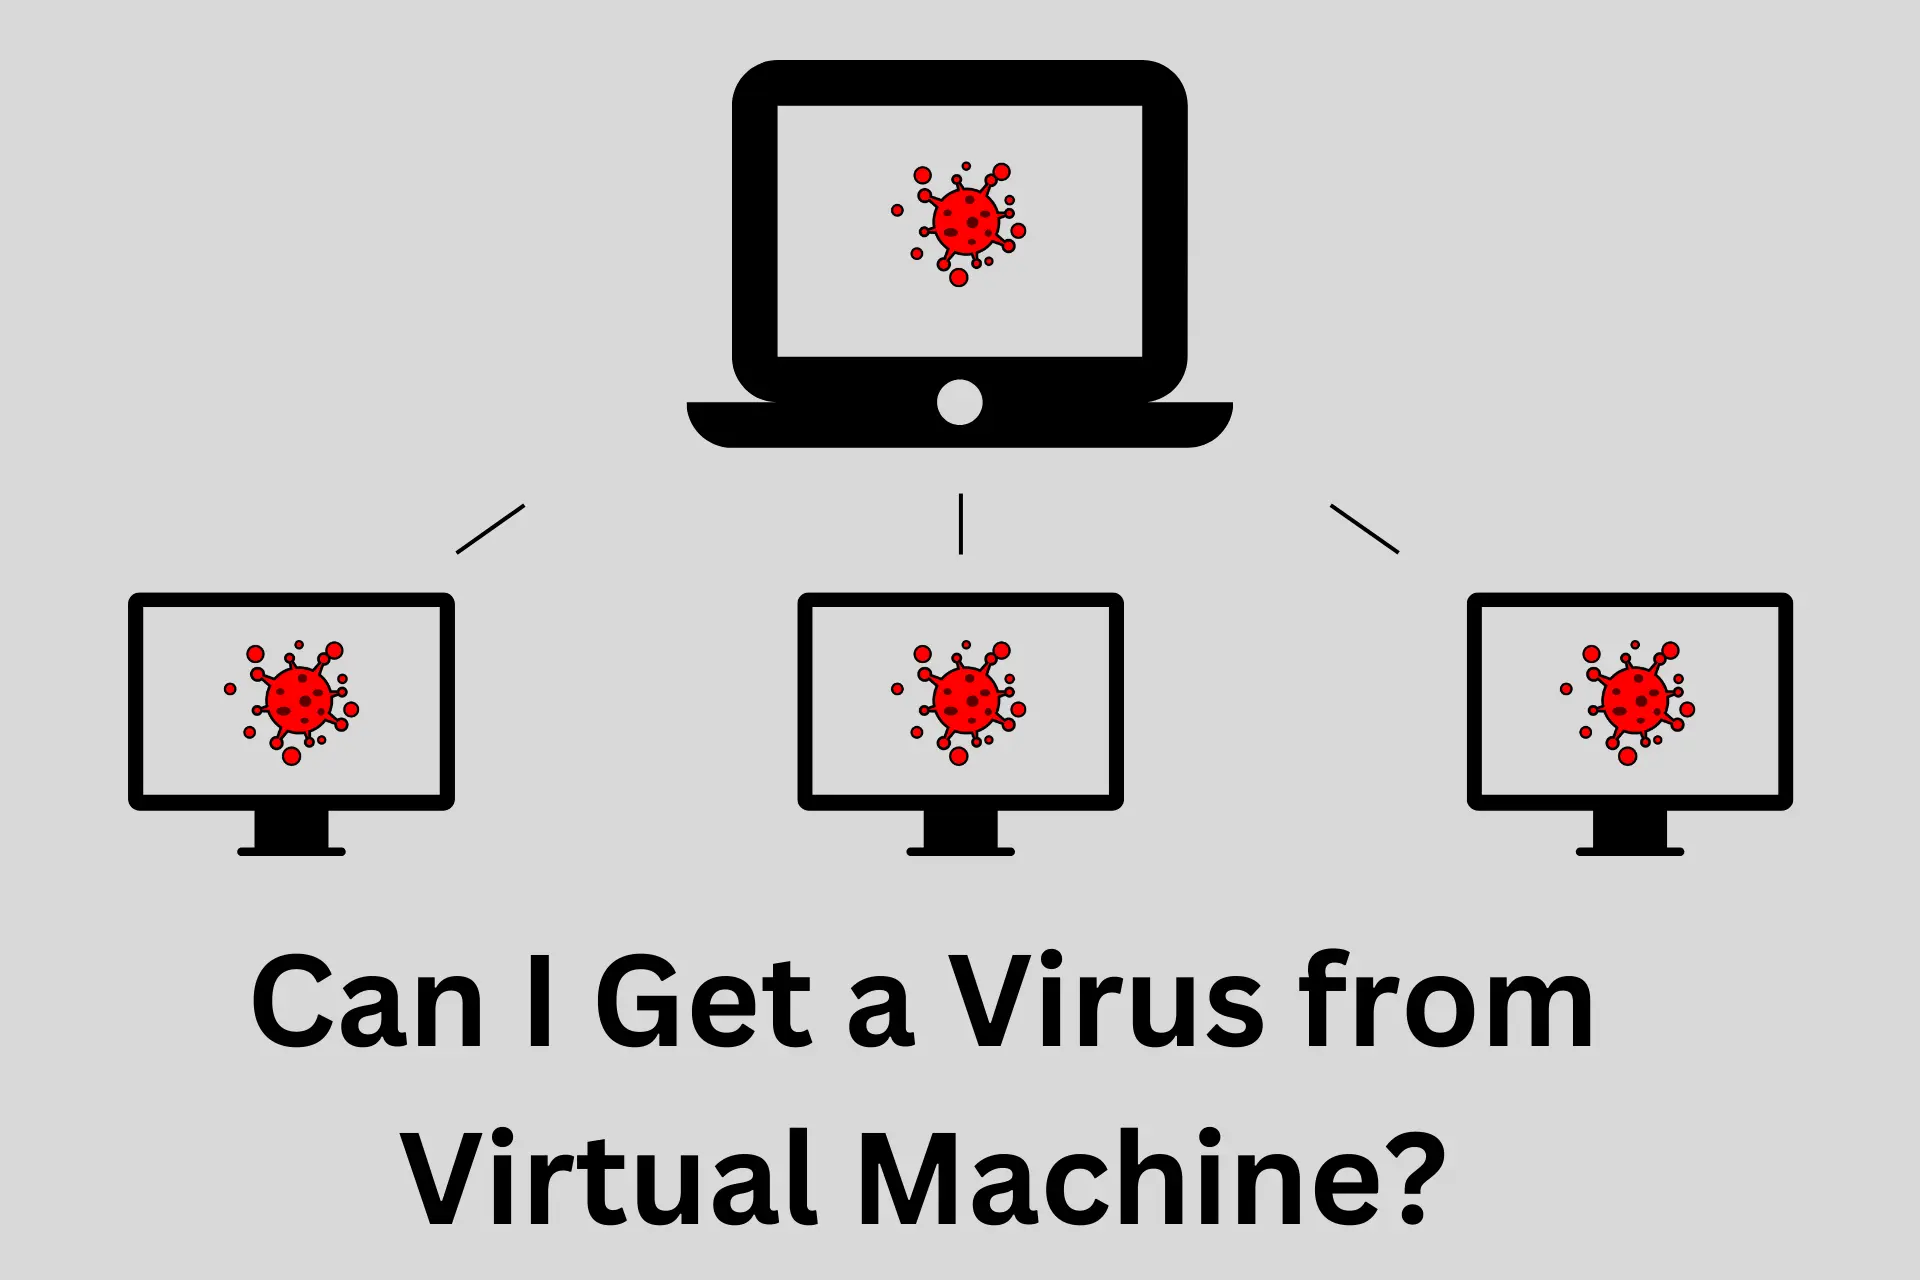 Can I Get a Virus from Virtual Machine